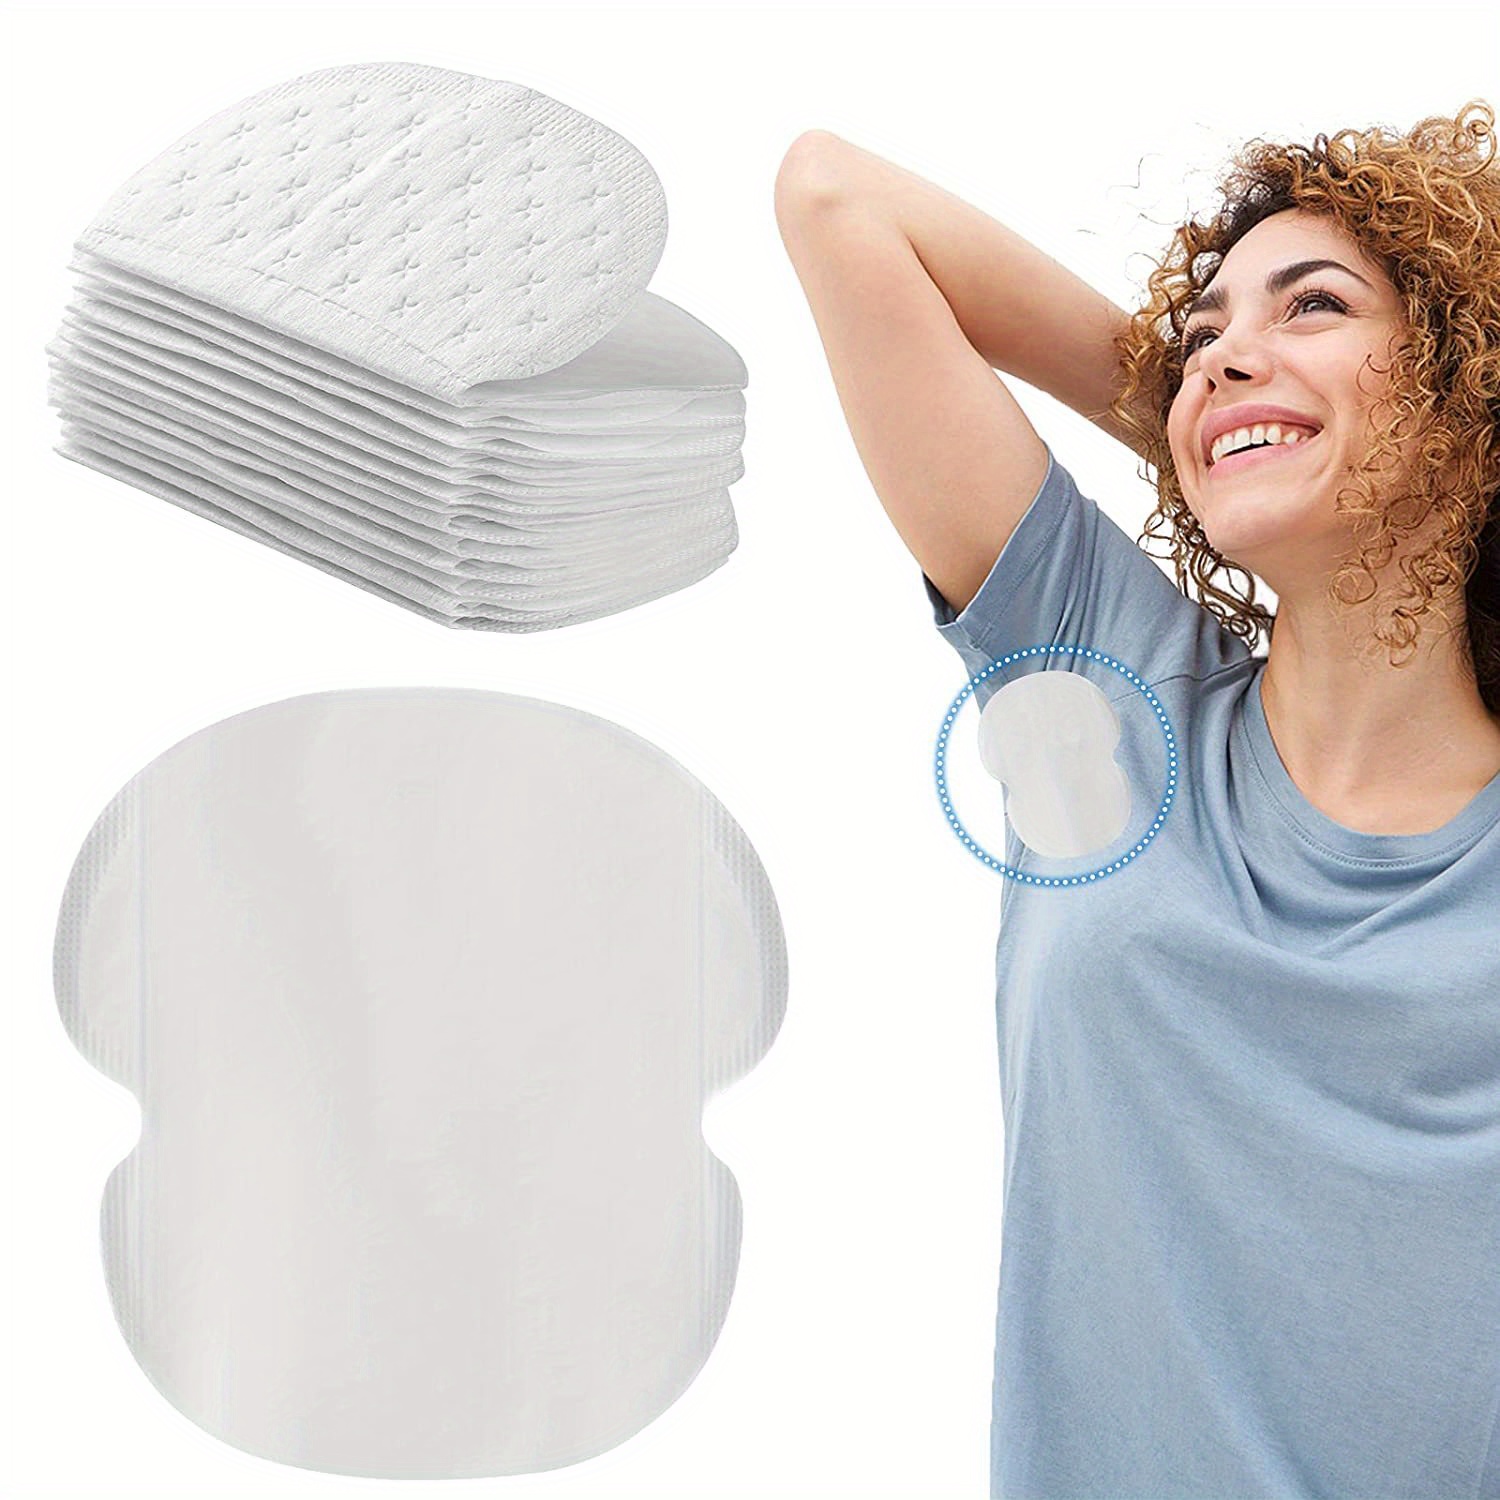 Underarm Sweat Pads, Armpit Sweat Pads for Women and Men 【100  Packs】,Premium Sweat Shield Fight Hyperhidrosis,Disposable Underarm Pads  for Sweating